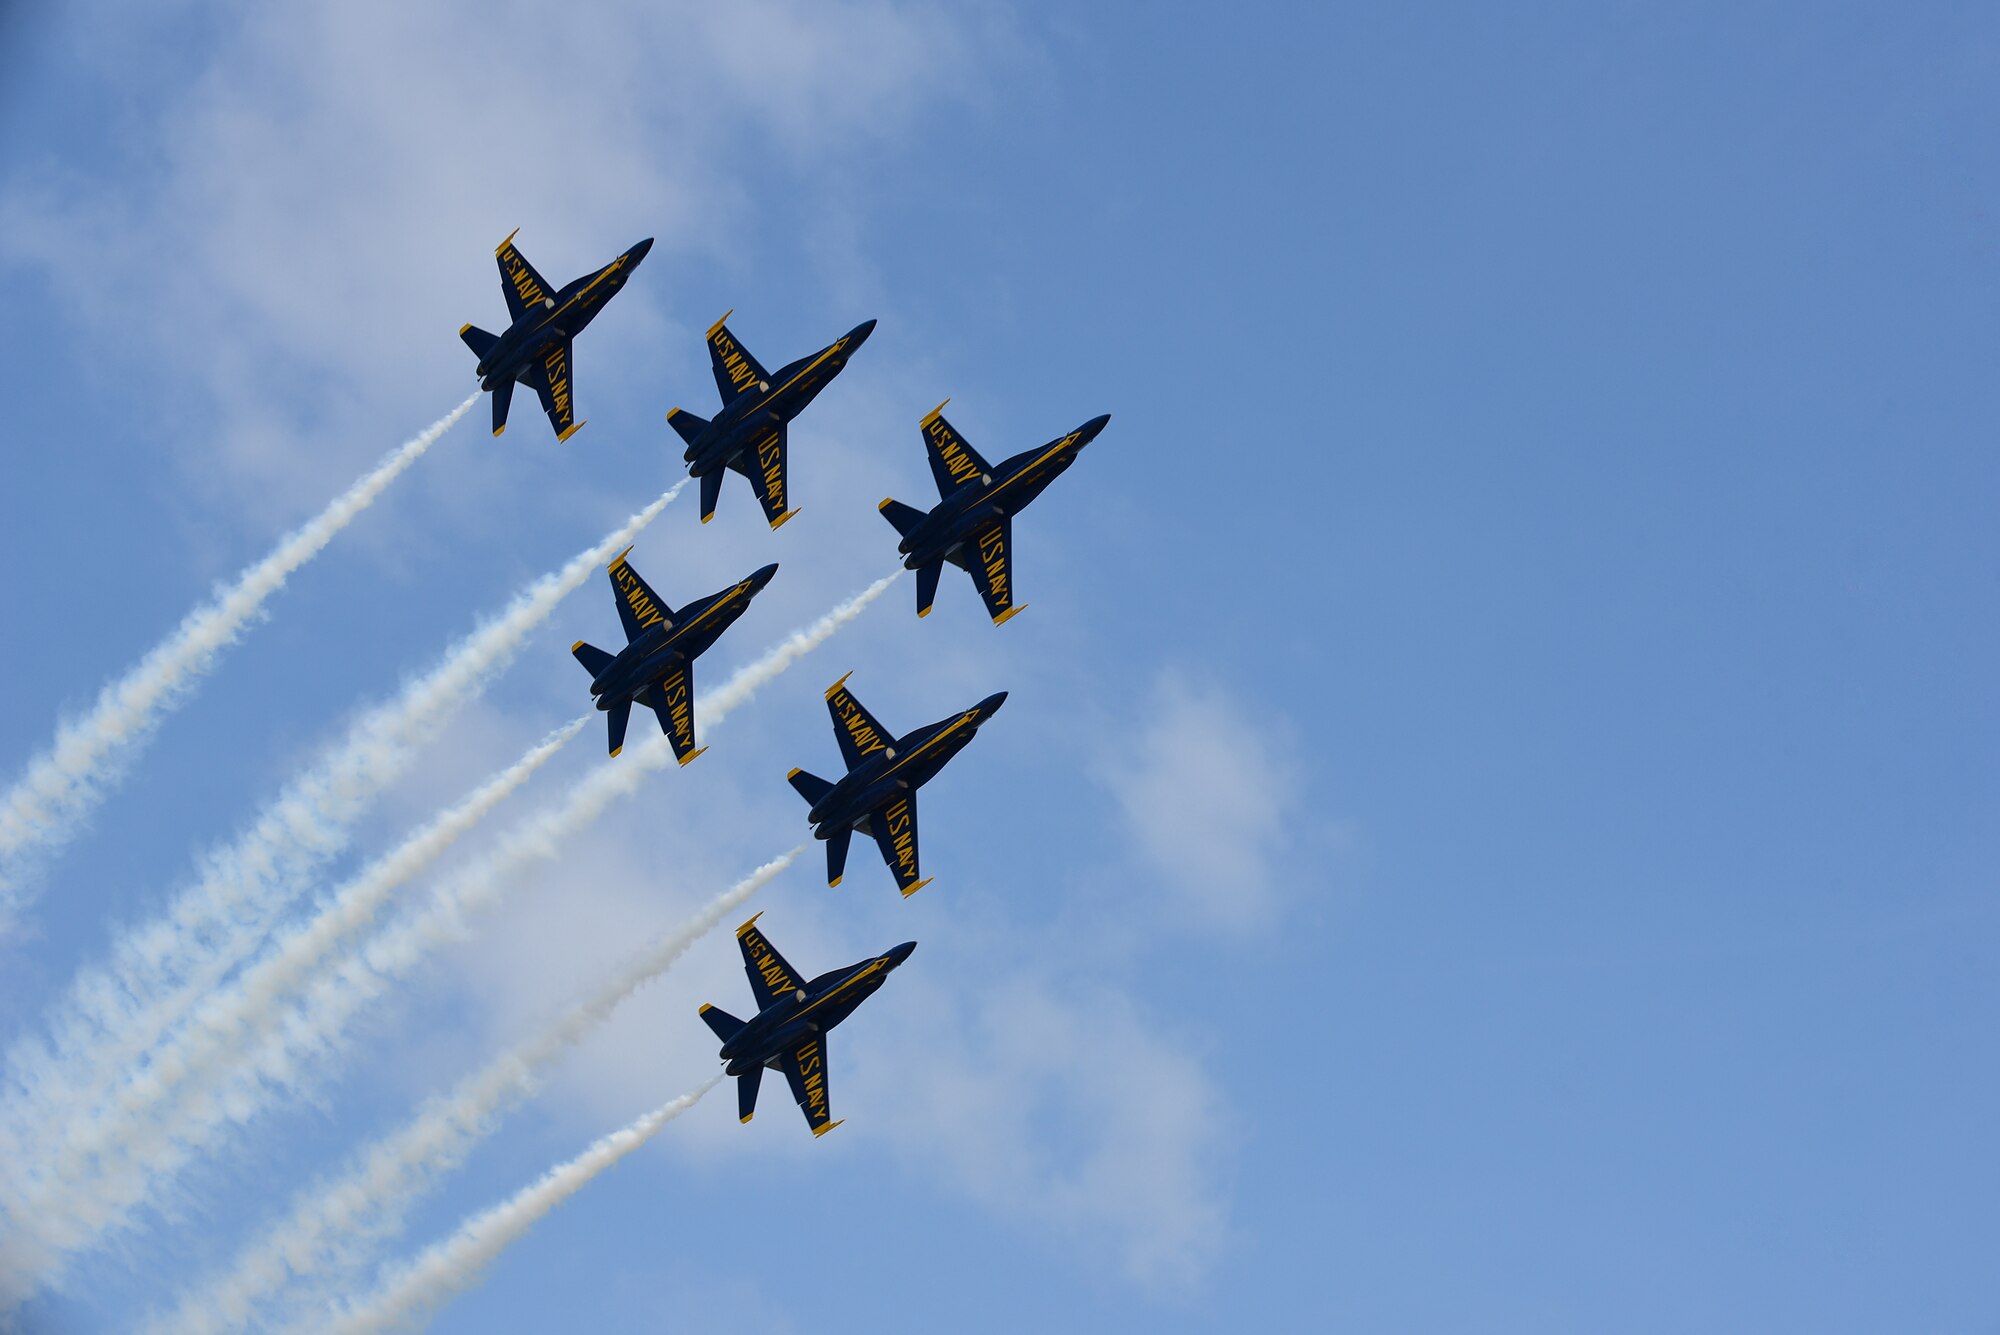 The U.S. Navy Blue Angels fly over Seymour Johnson Air Force Base, North Carolina, May 21, 2017, during the Wings Over Wayne Air Show. The air show was a free, two-day event that featured more than 20 aerial demonstrations, aircraft static displays, military working dog demonstrations and other events. (U.S. Air Force photo by Airman 1st Class Kenneth Boyton)